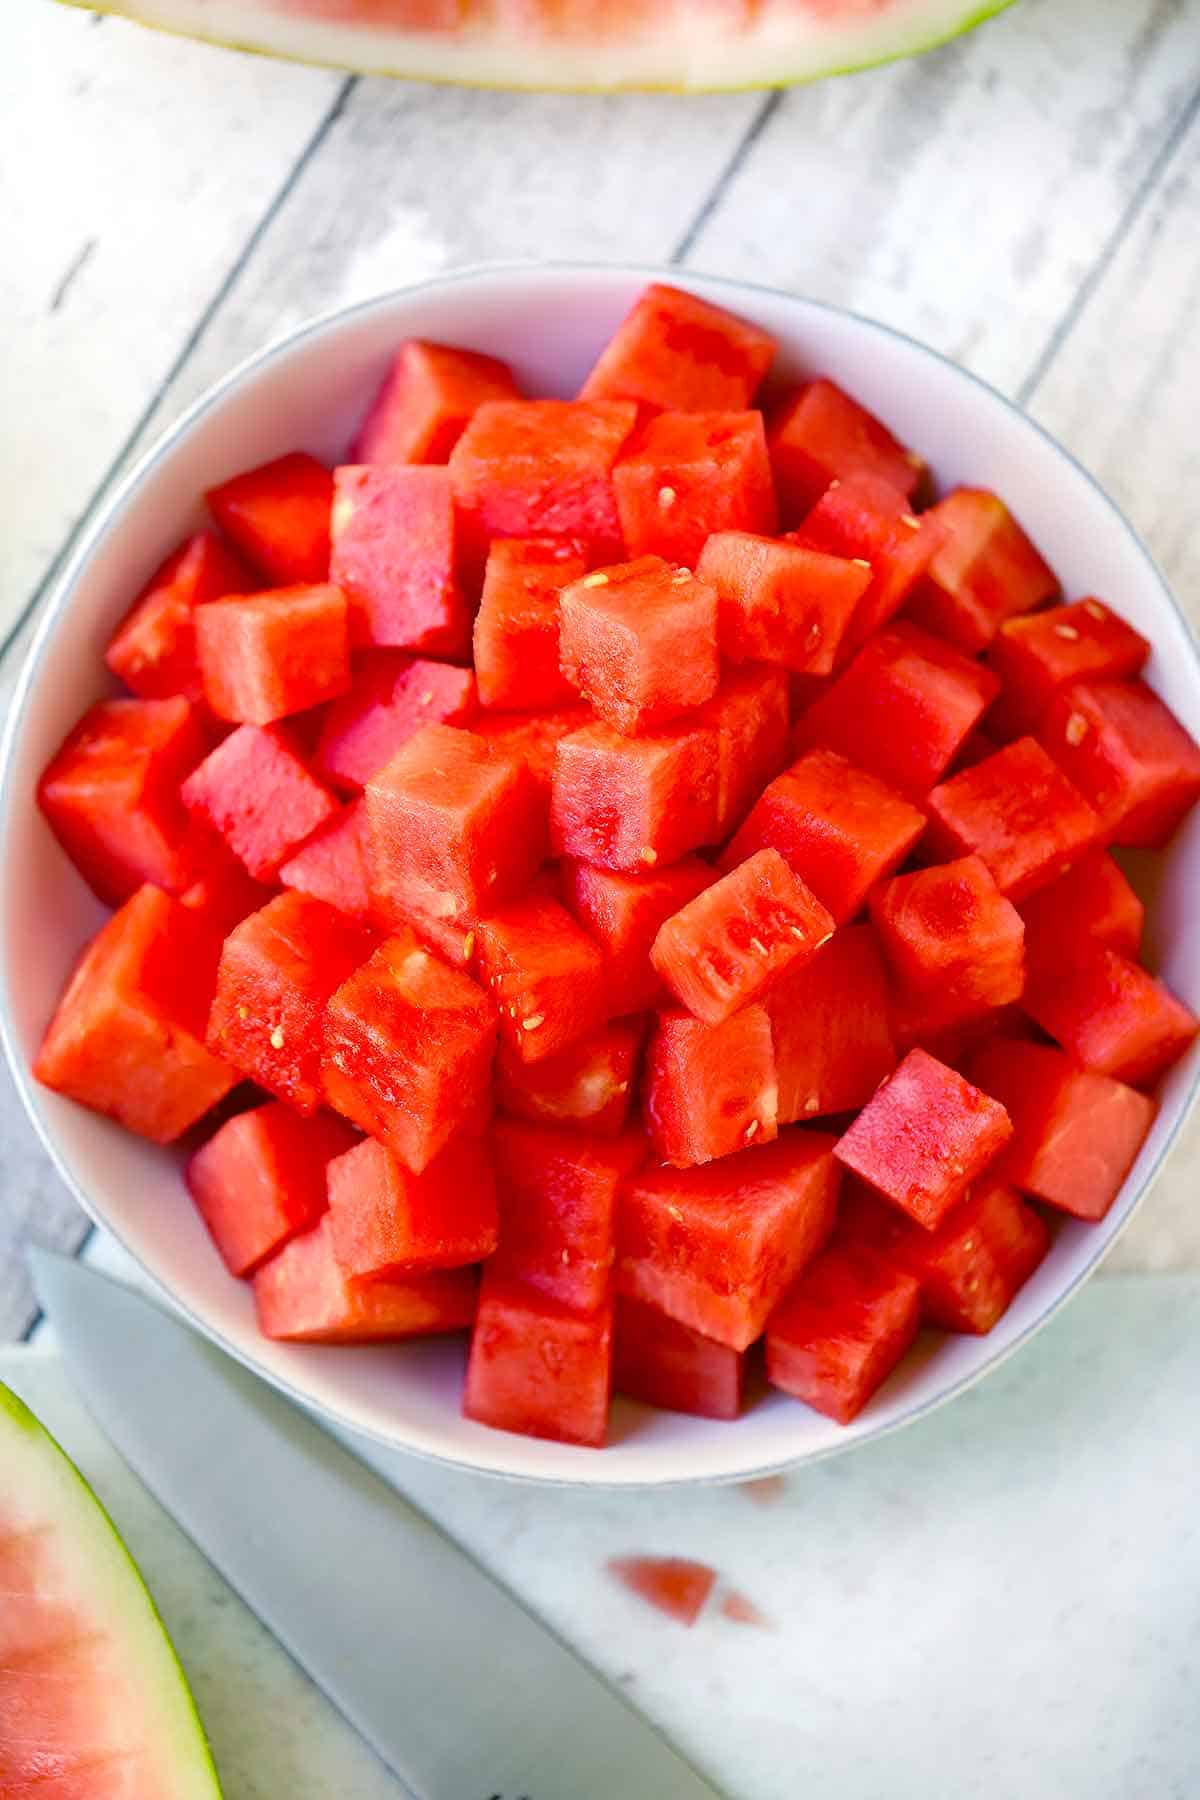 Square photo oA white bowl filled with cubed watermelon pieces.f cubed watermelon in a white bowl.